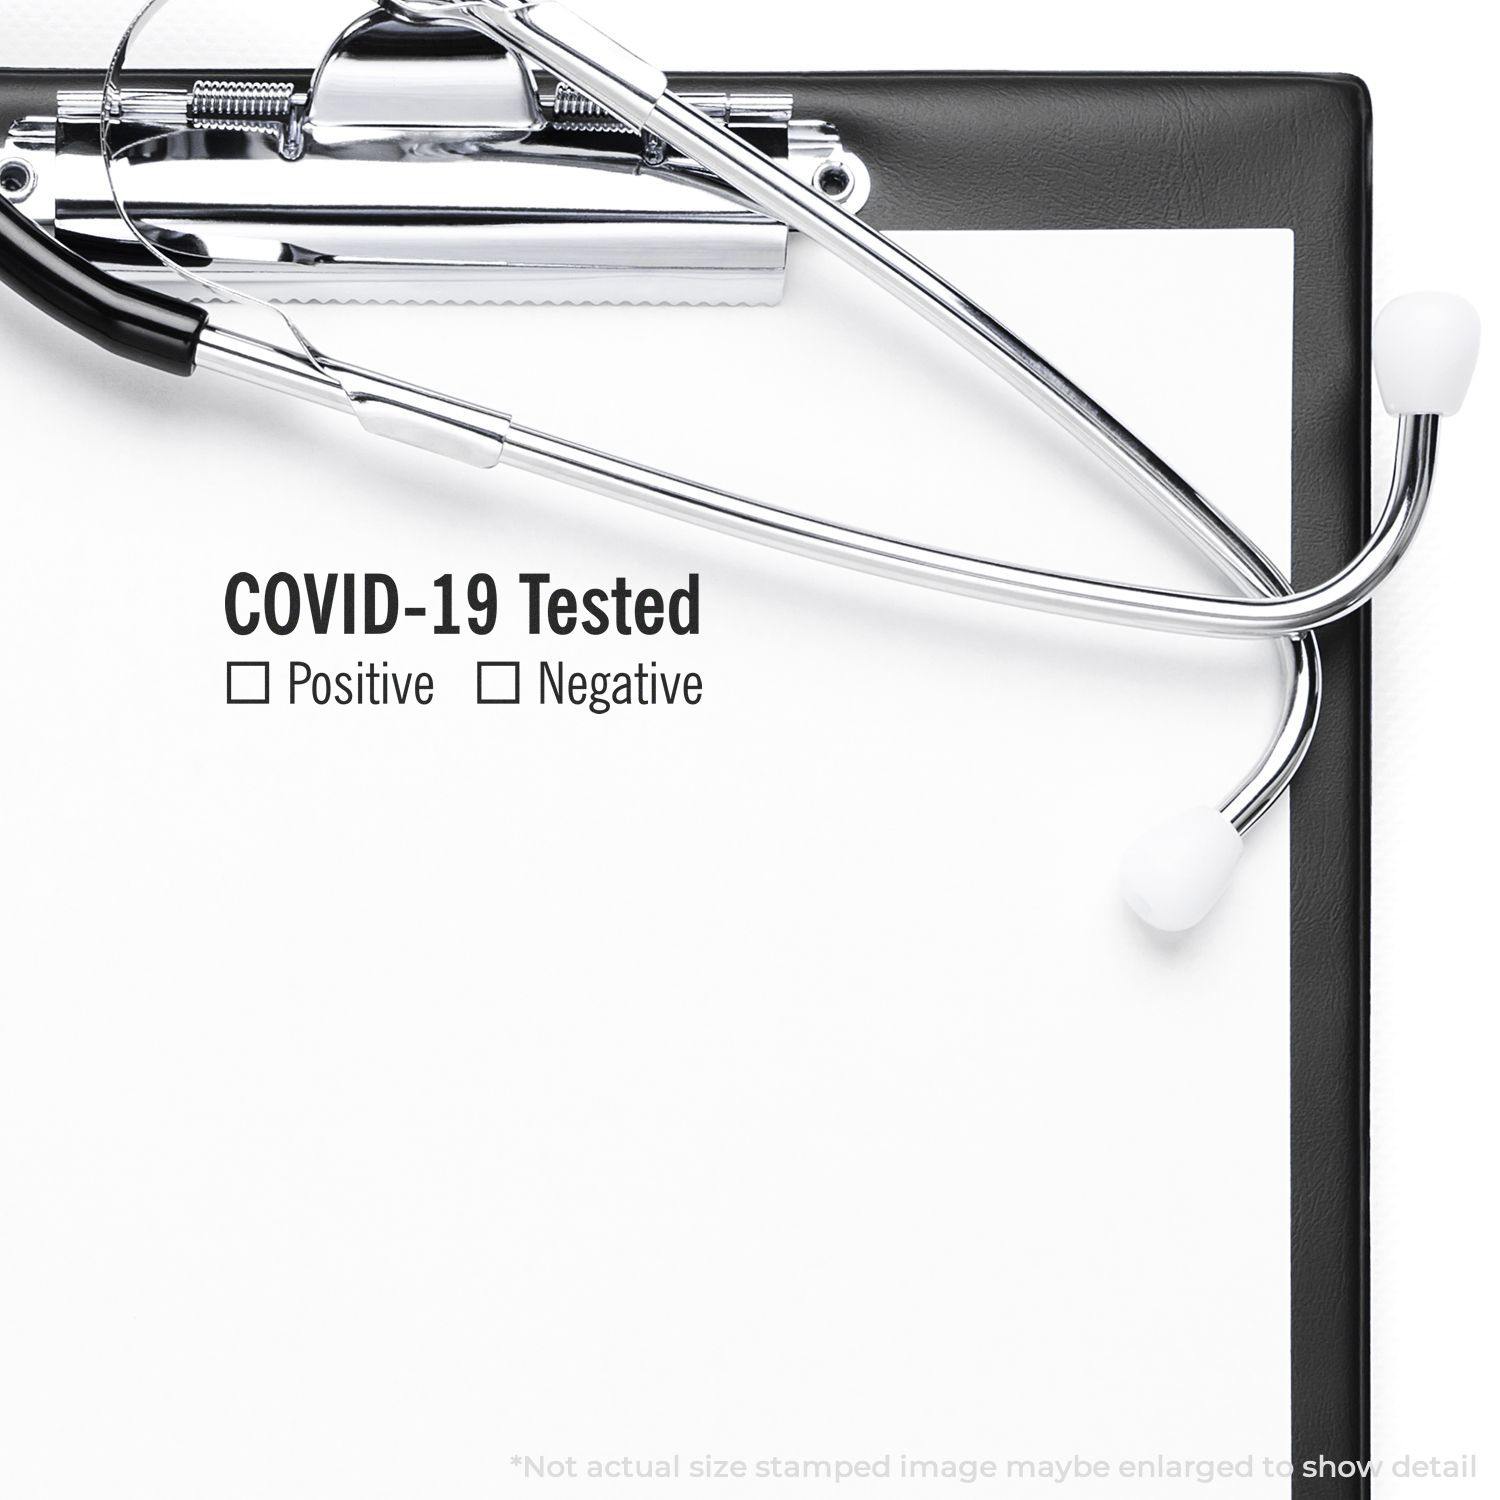 A self-inking stamp with a stamped image showing how the text "COVID-19 Tested" in a large font with a space underneath (where a box can be checked based on whether a person is positive or negative for the virus) is displayed by it after stamping.